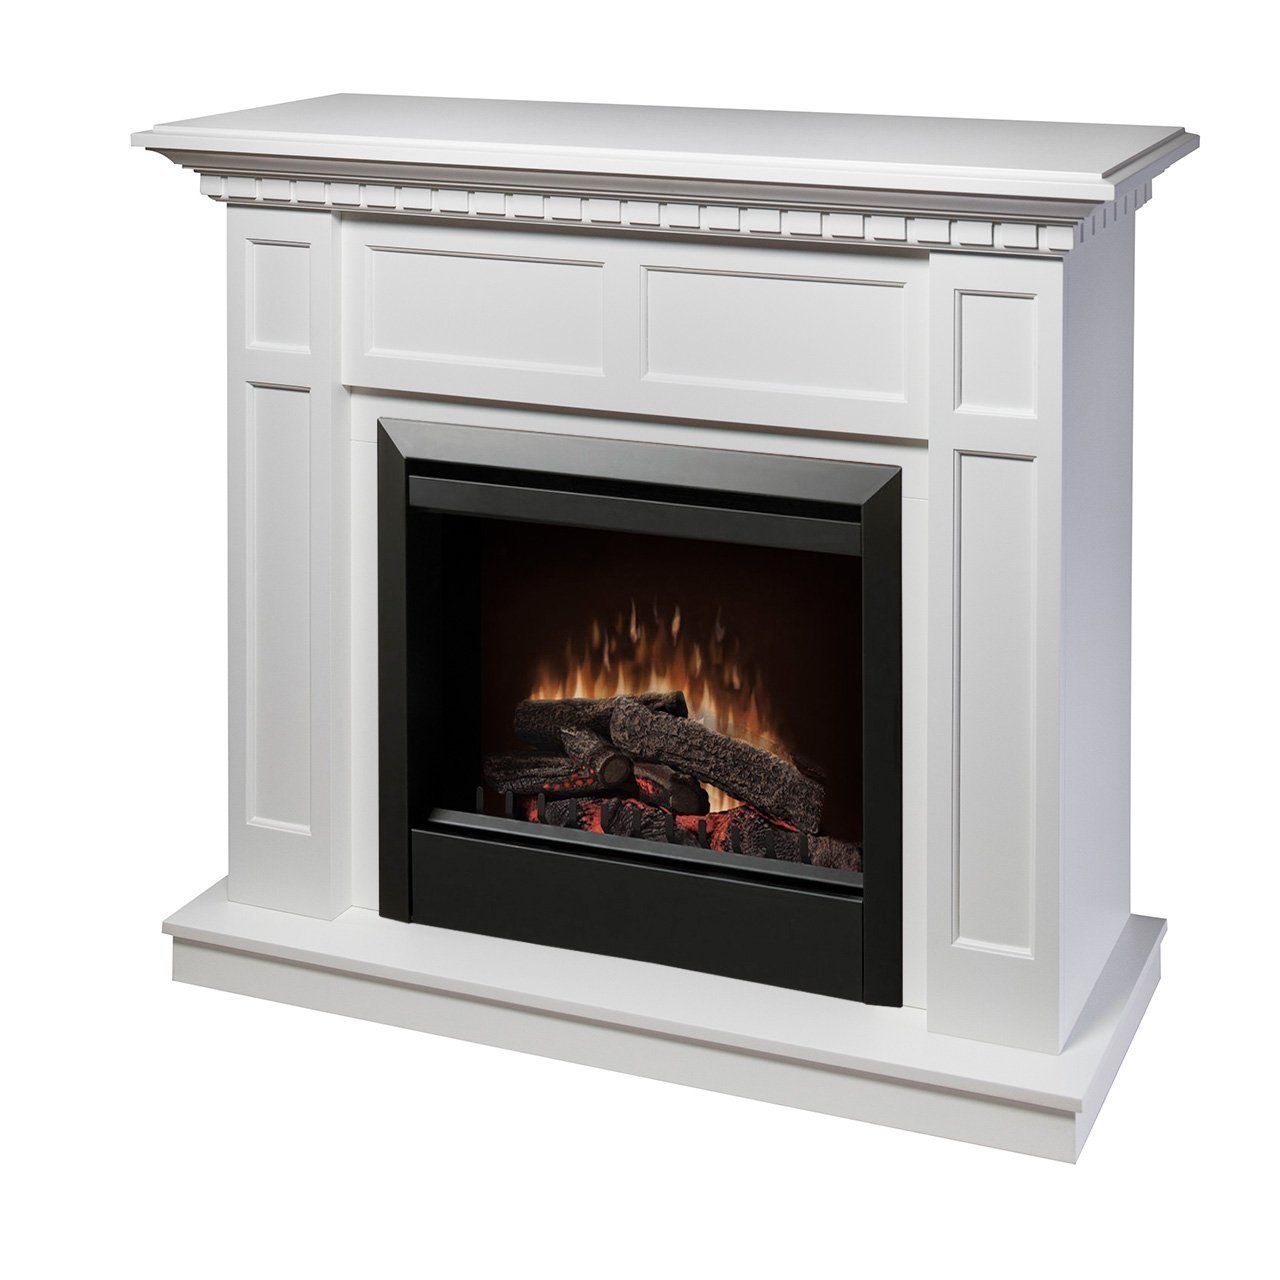 Real Flame Silverton Electric Fireplace Beautiful Dimplex Caprice 23" Electric Fireplace with Wooden Mantel